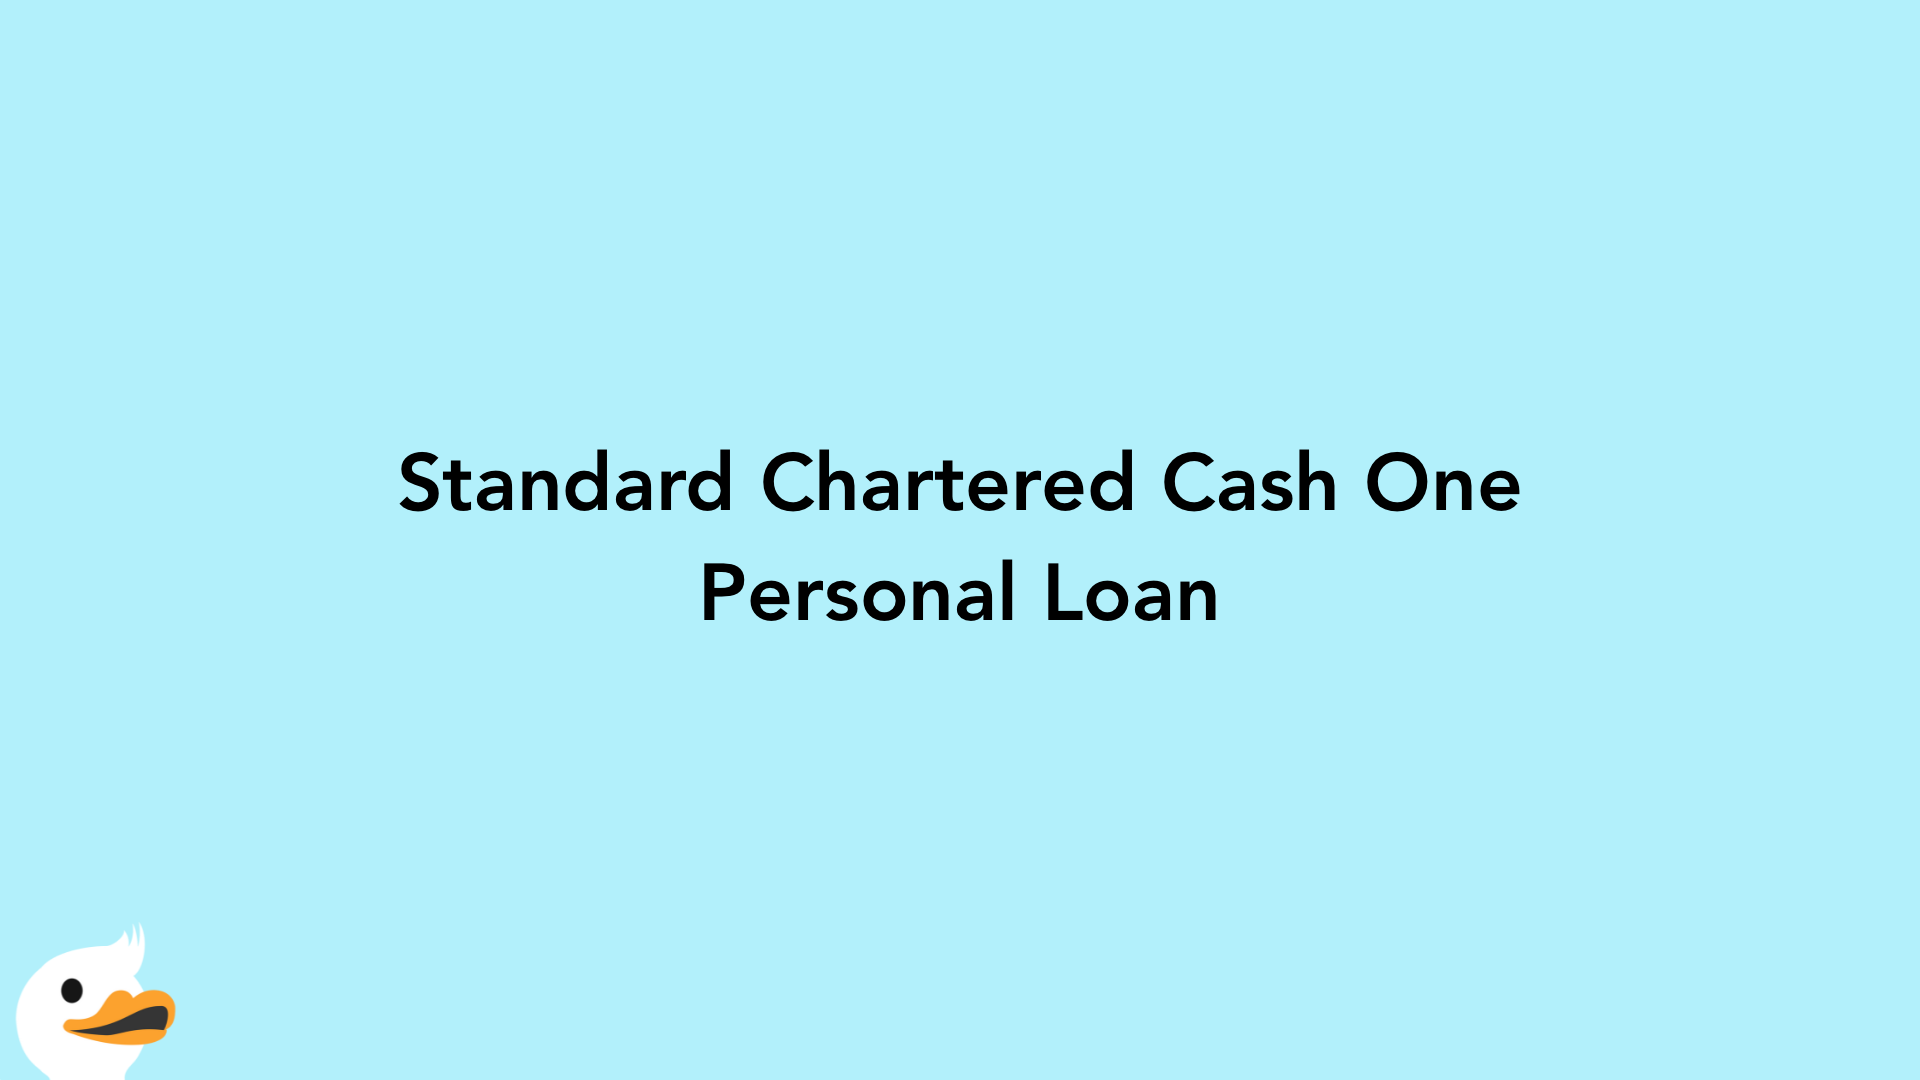 Standard Chartered Cash One Personal Loan